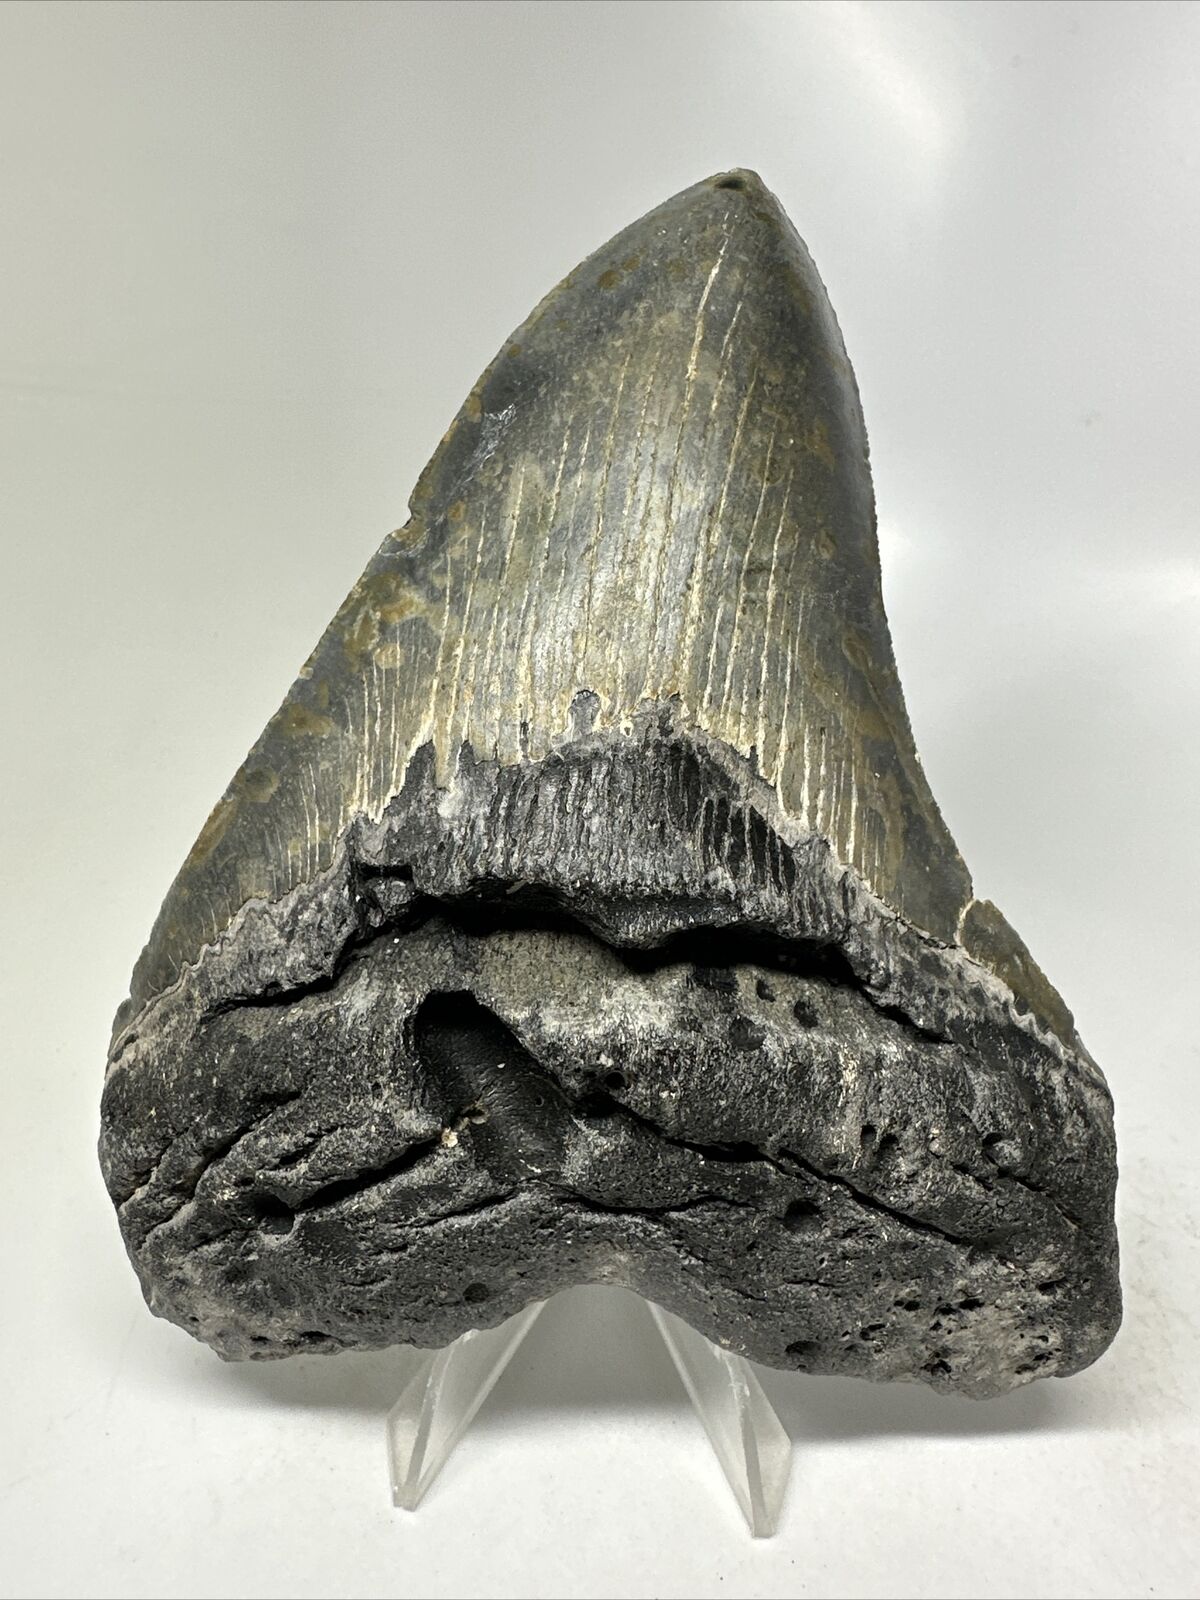 Megalodon Shark Tooth 5.46” Amazing - Colorful Fossil - Authentic 15824